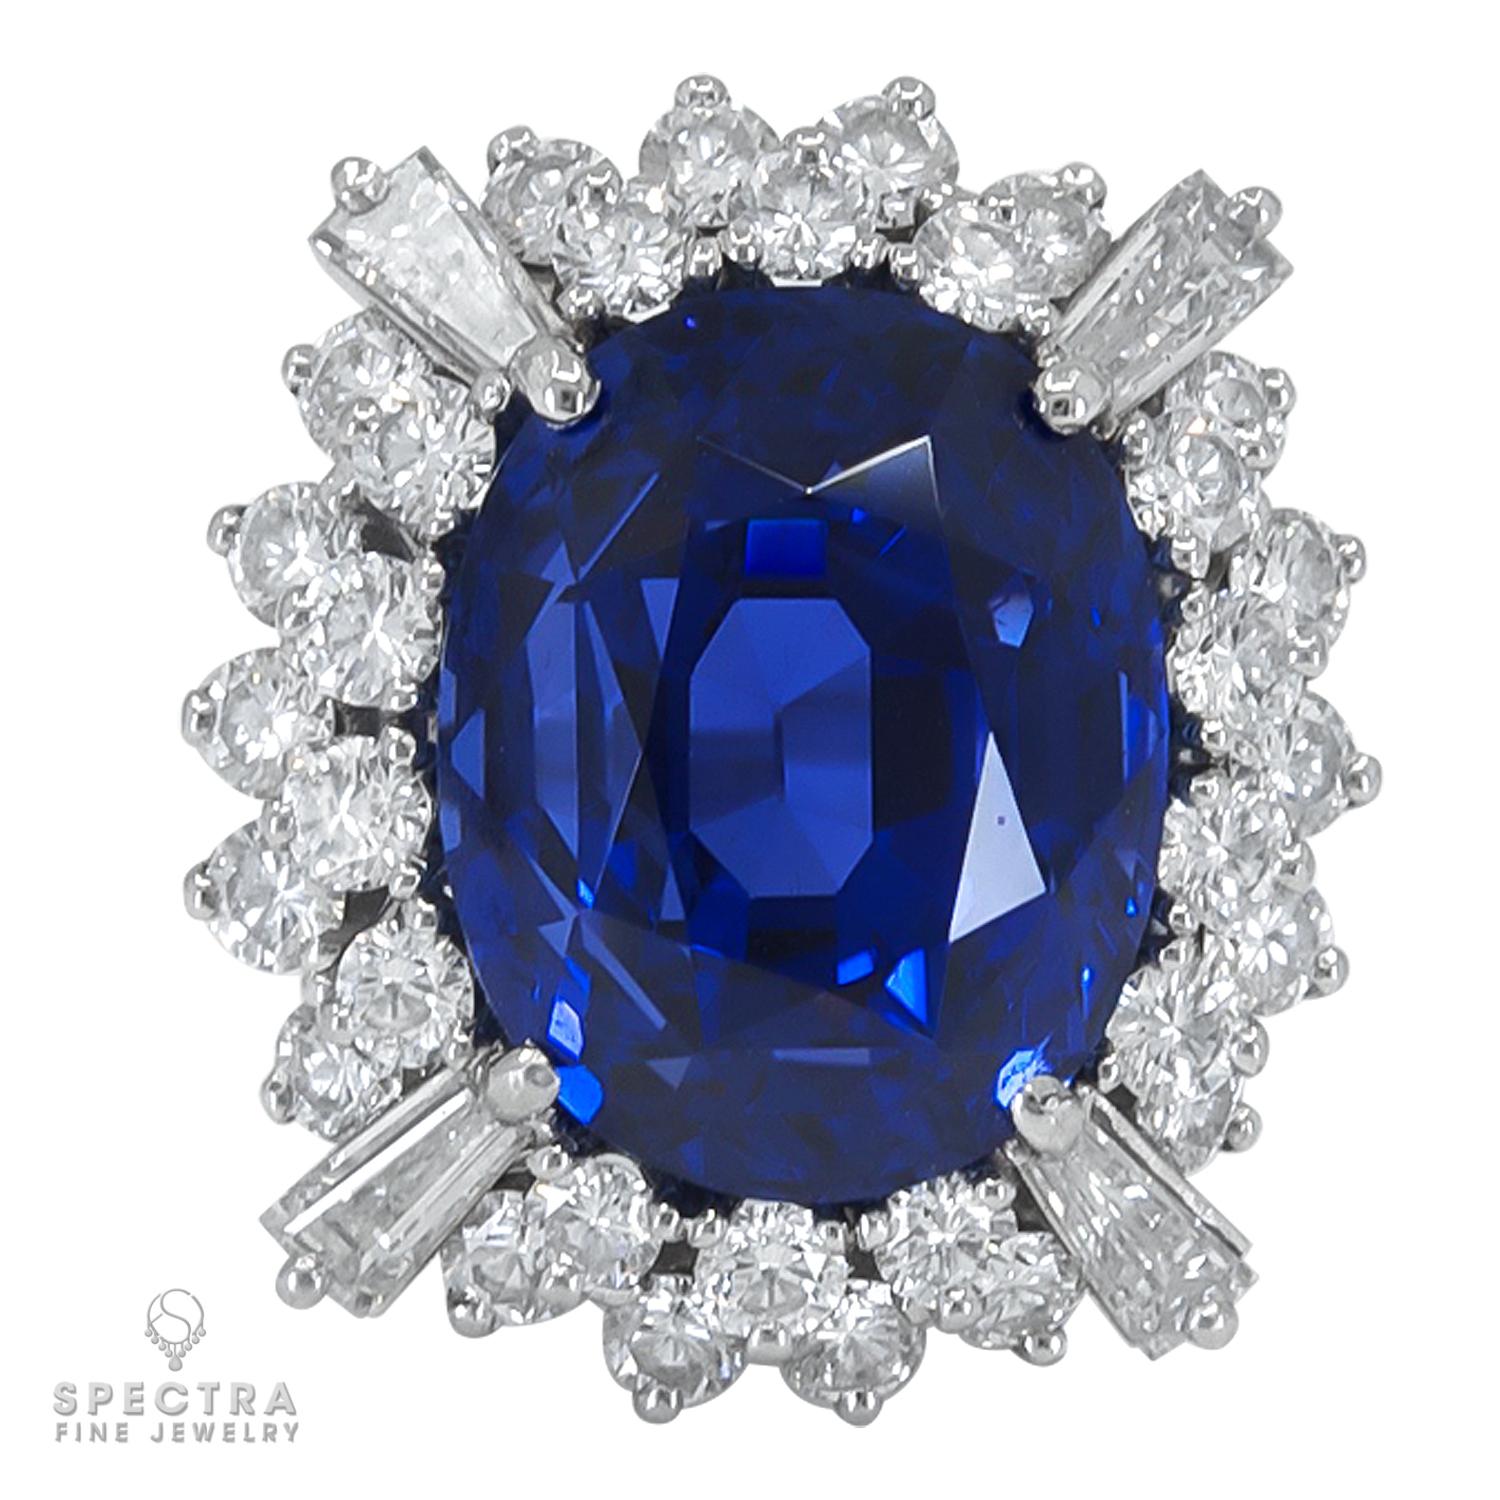 A beautiful cocktail ring set with a 19.28 carat oval blue sapphire, accented by 32 rose-cut diamonds and 4 baguette-cut diamonds.
Art Deco inspired.
The sapphire is certified by AGL stating that it's of Ceylon origin with no indication of thermal